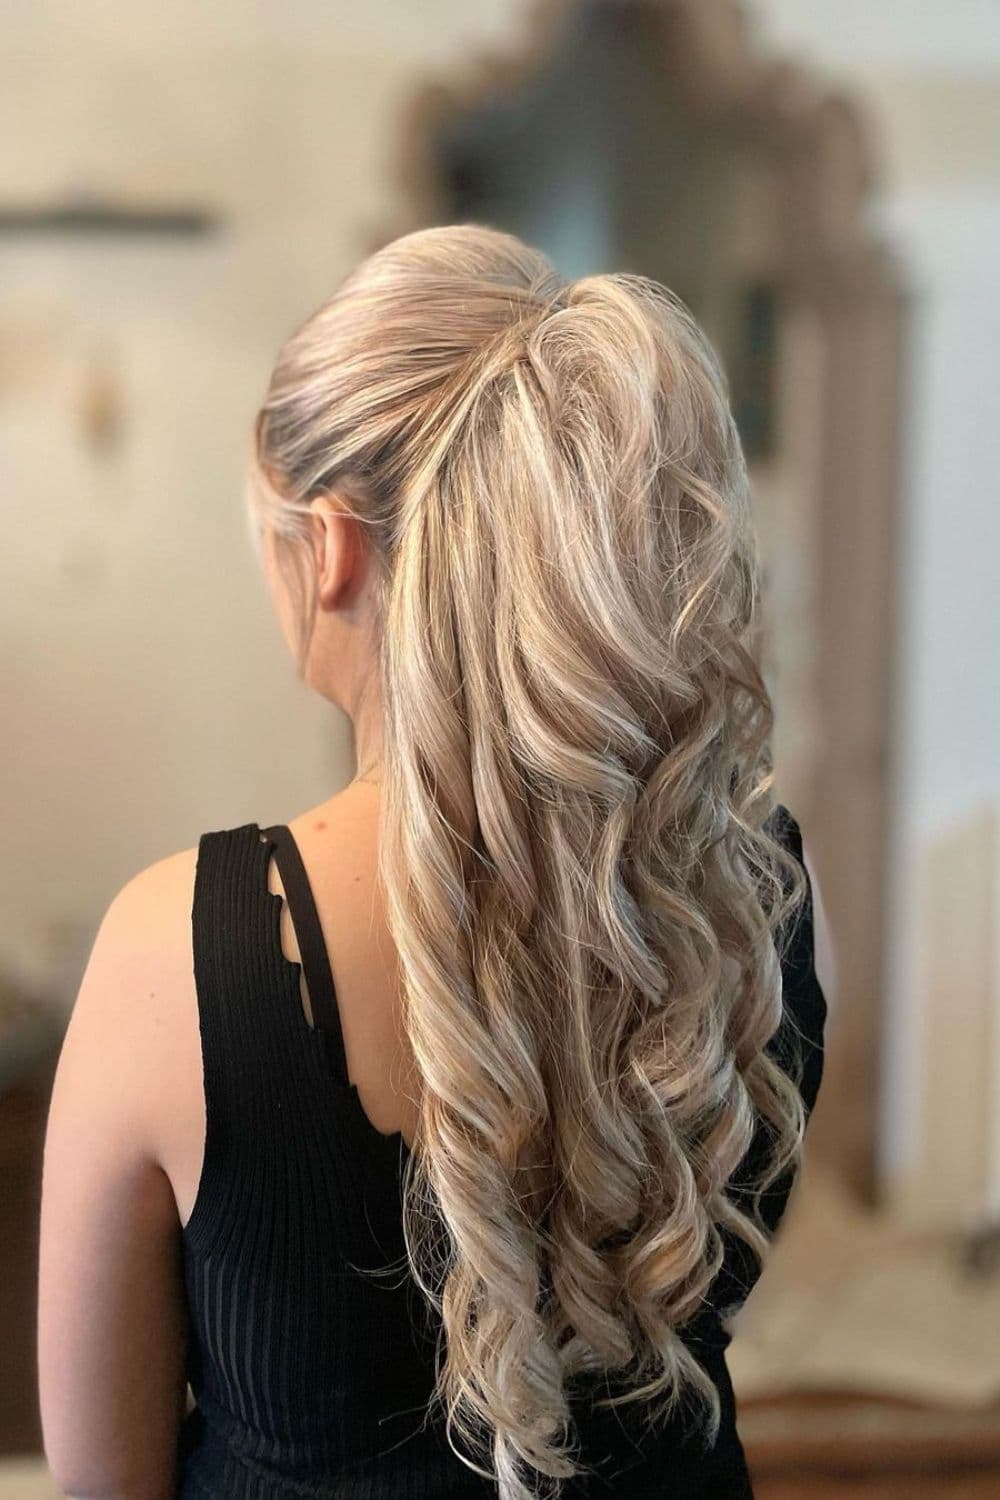 A woman with a blonde teased half-updo hairstyle.